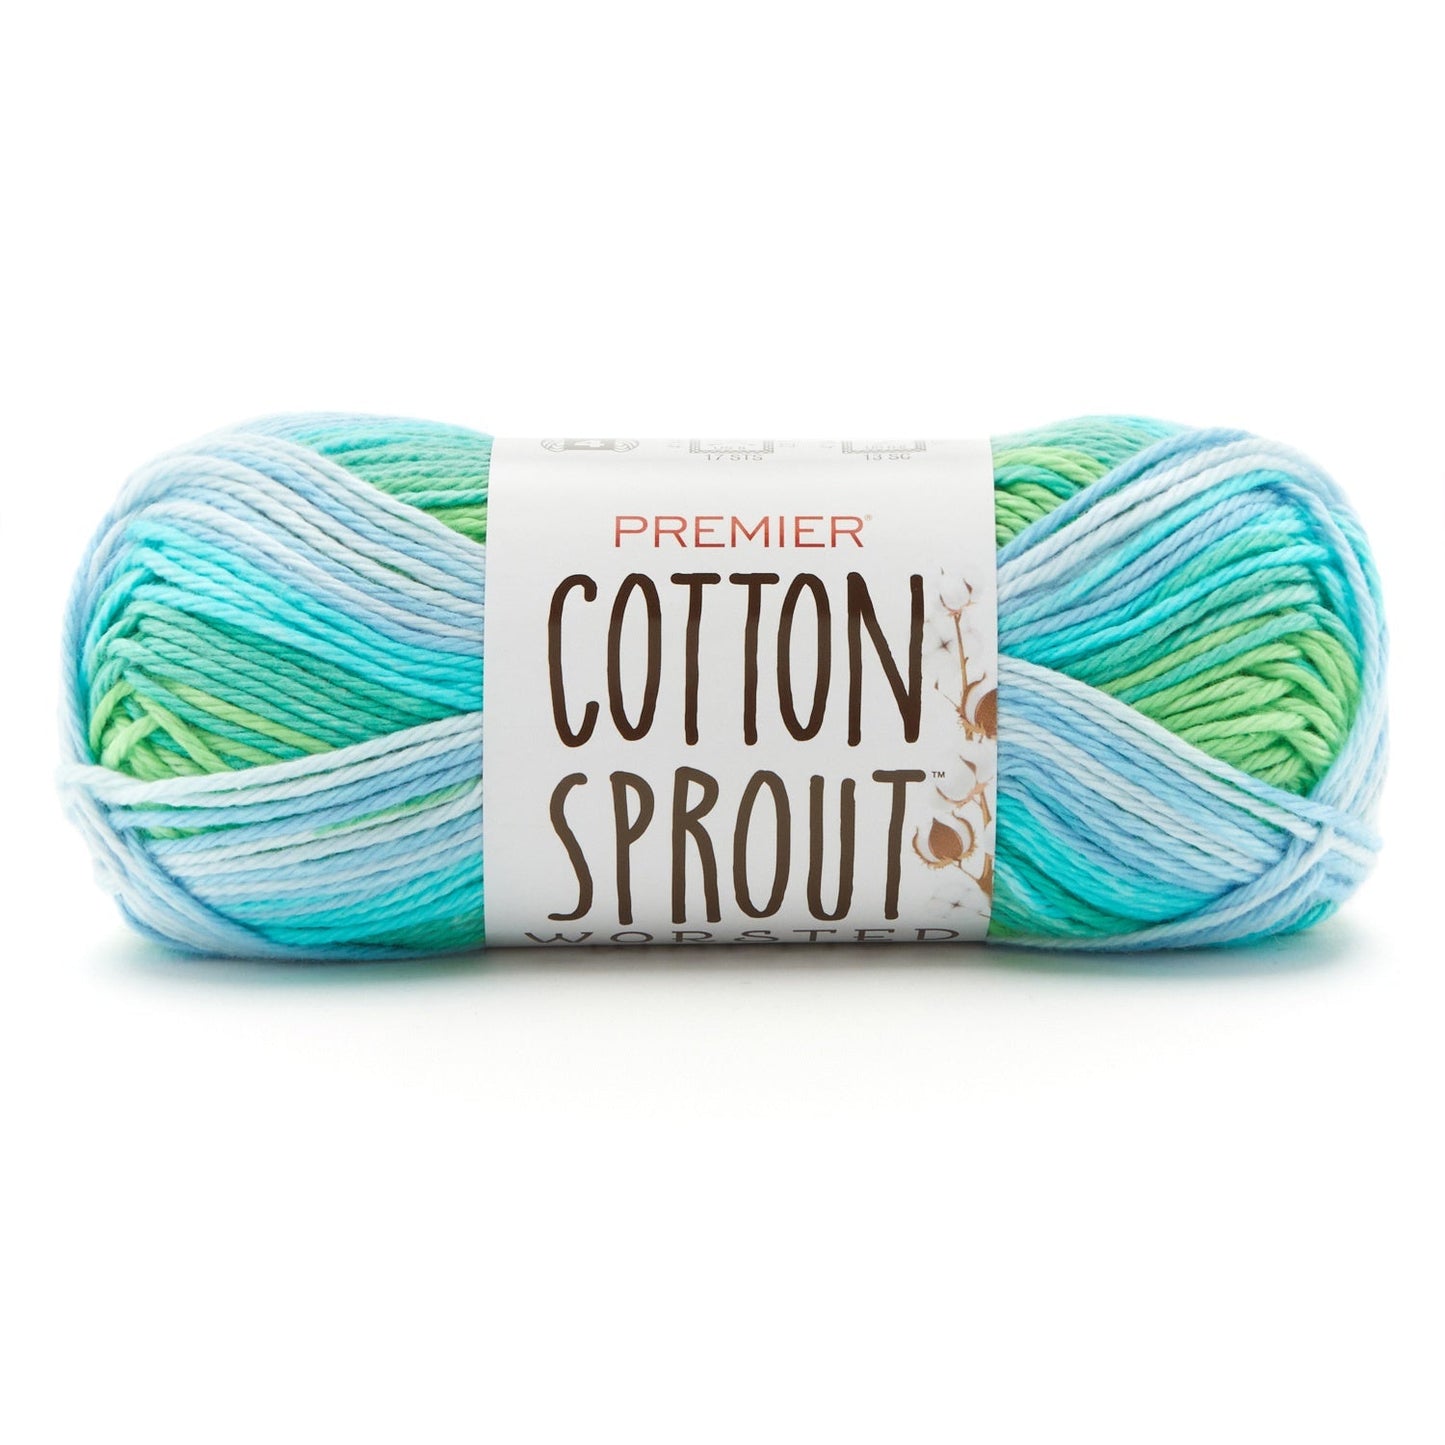 Premier cotton sprout worsted multi yarn - 2